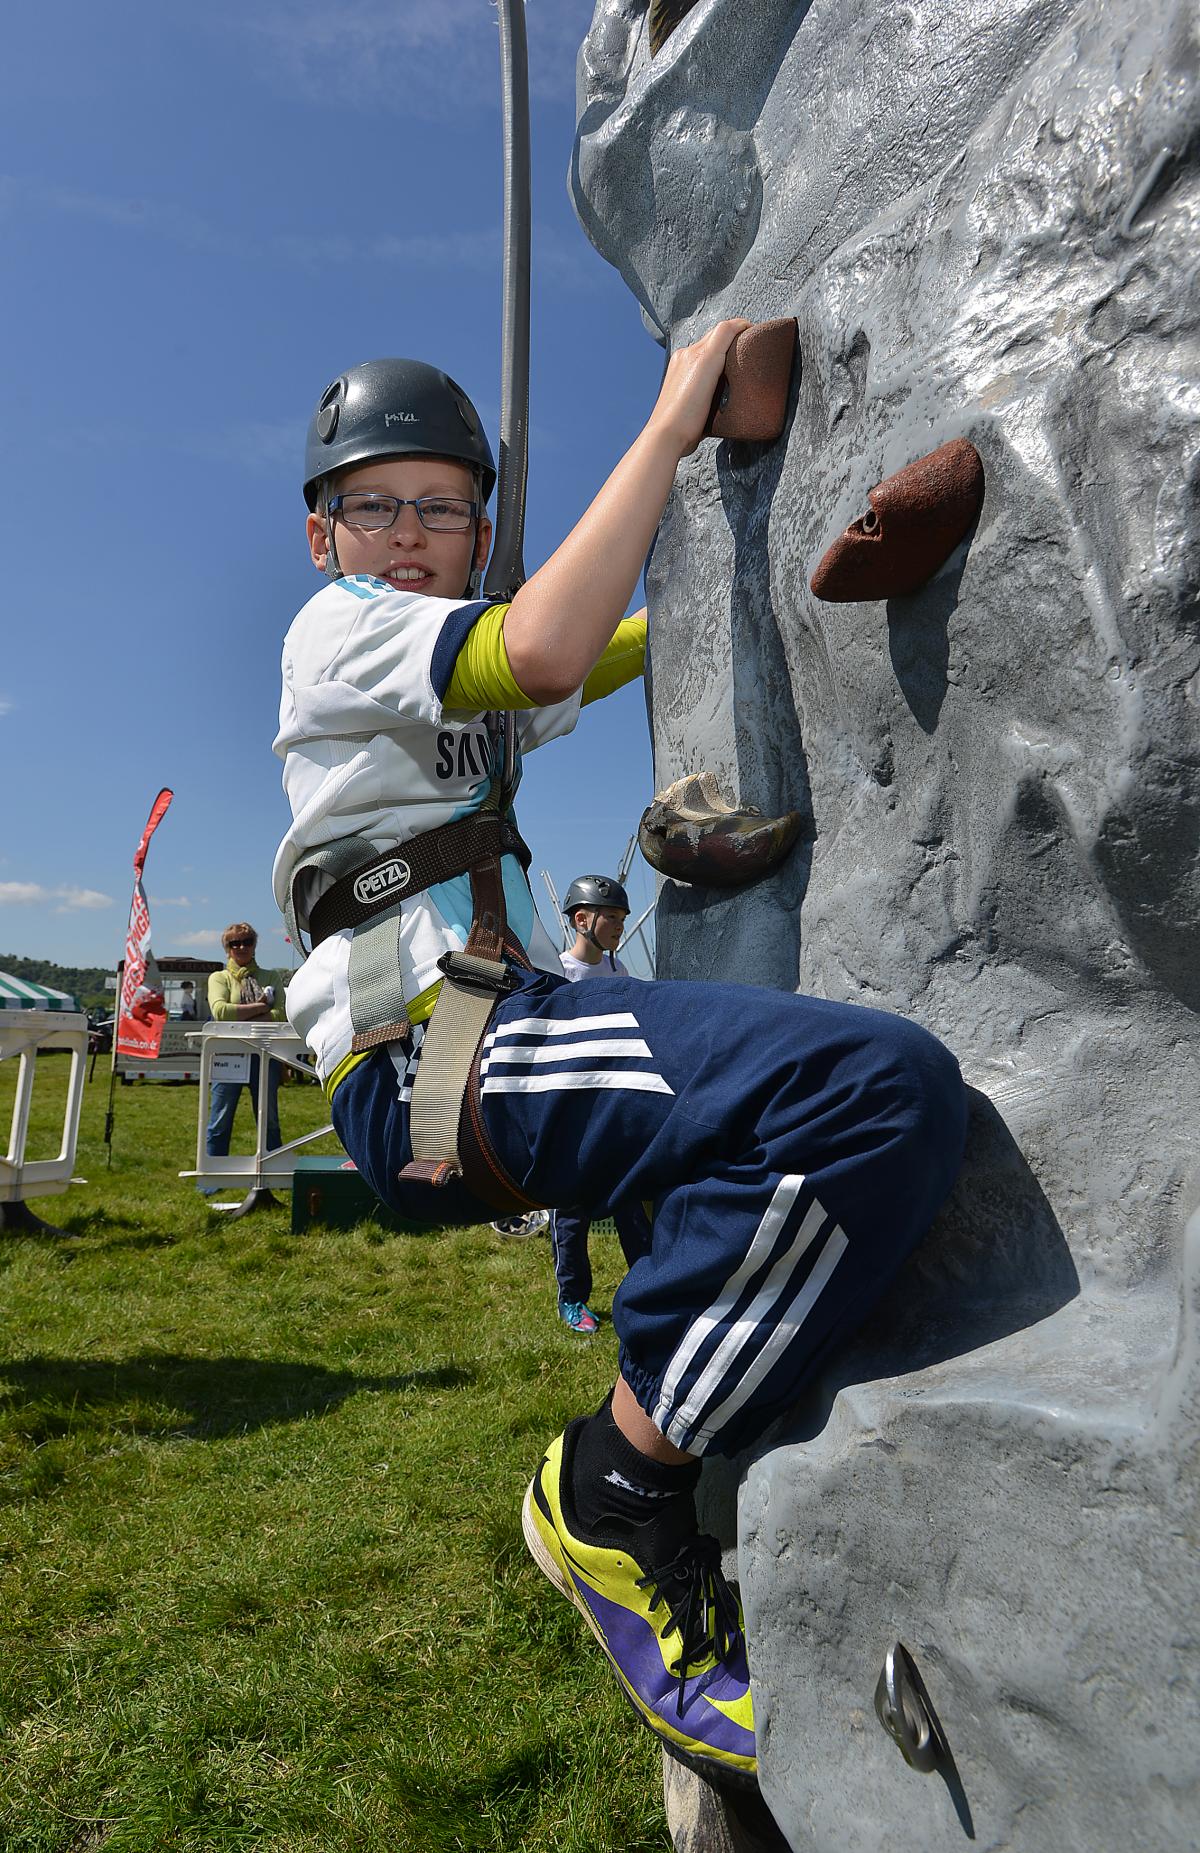 Tackling the climbing wall for the first time is Josh Brown, ten